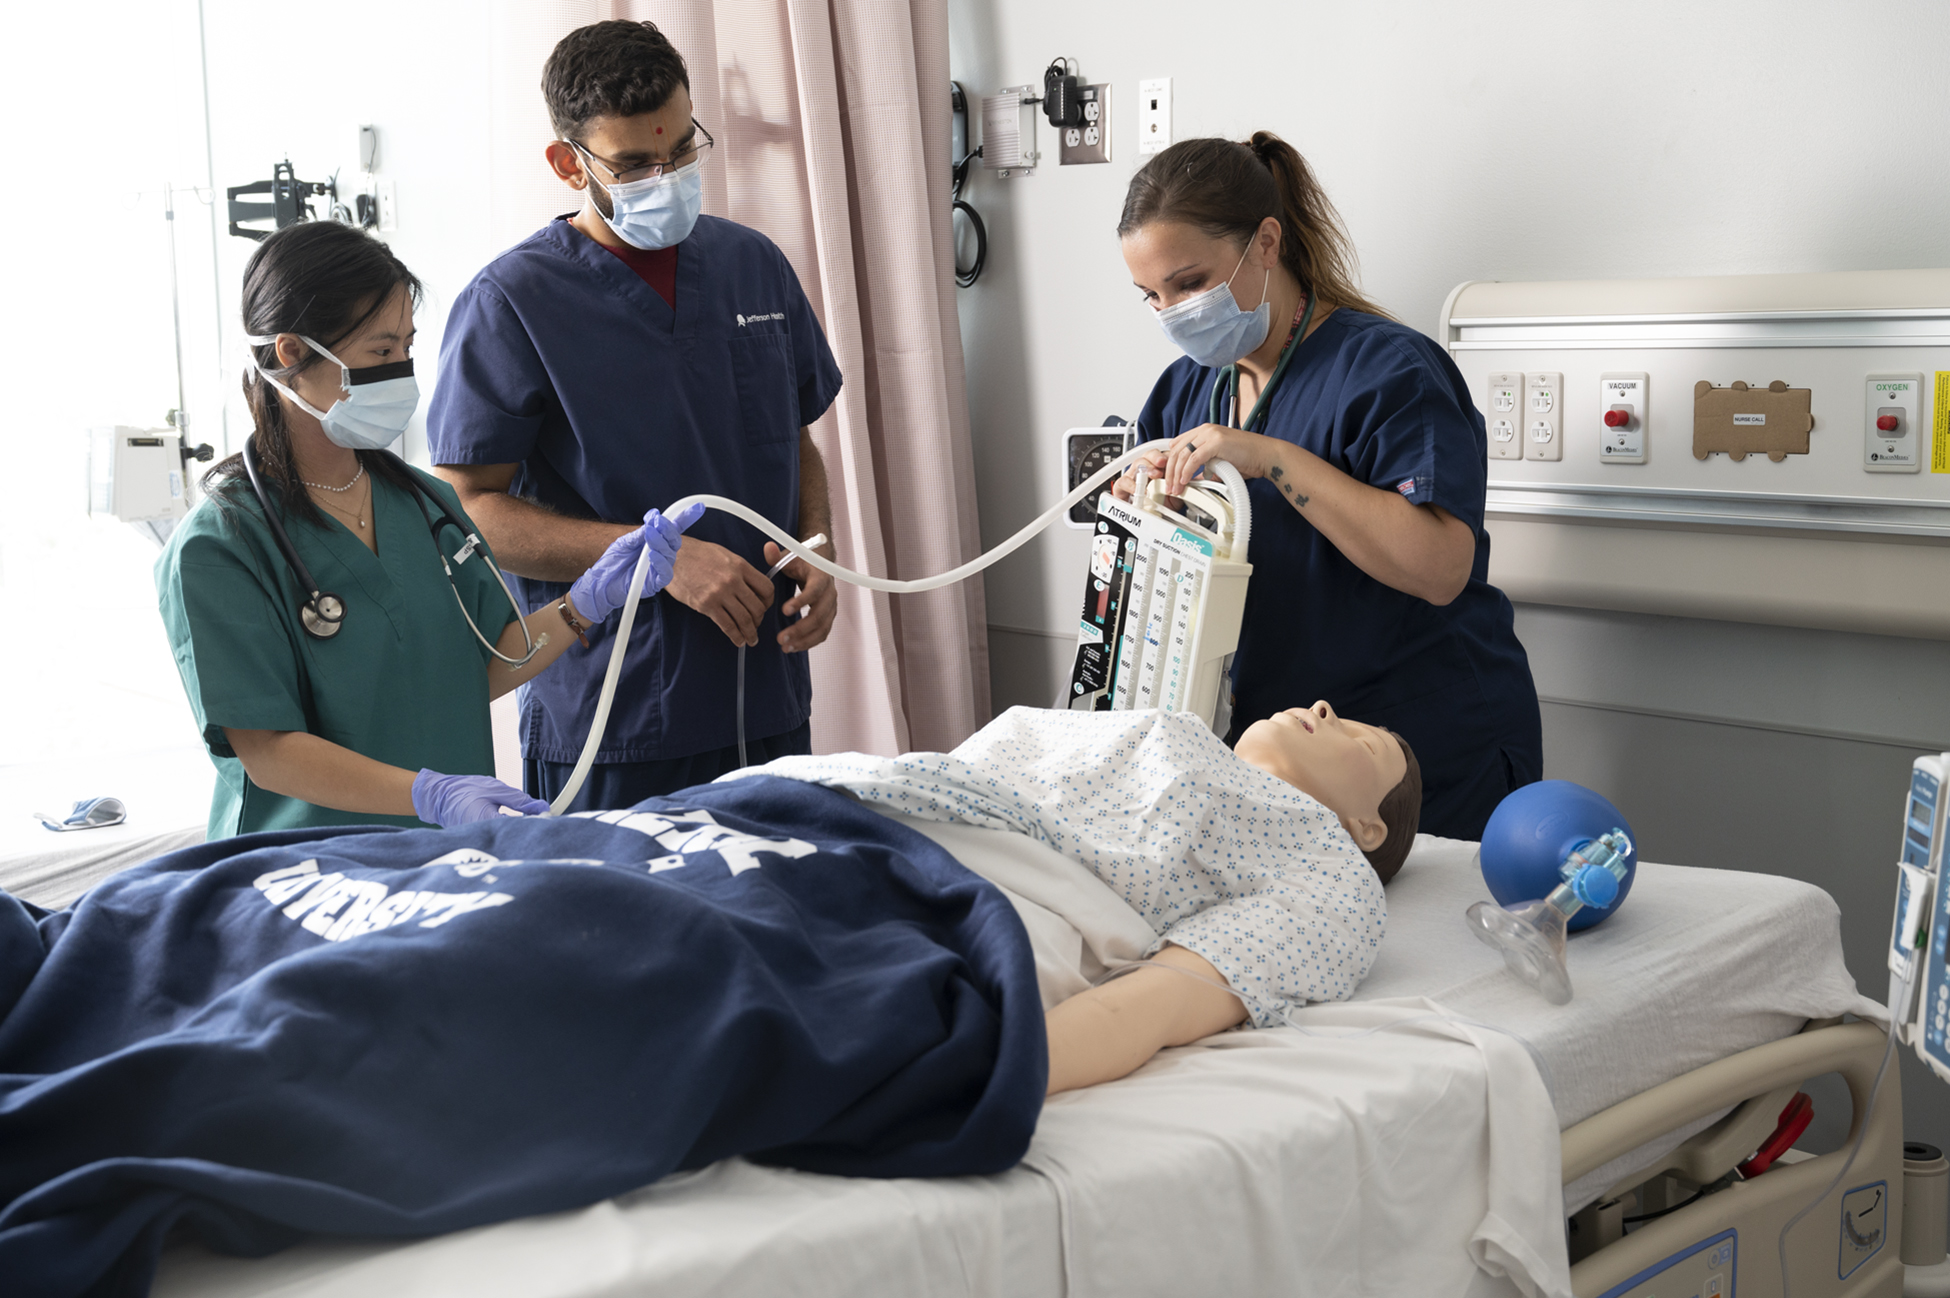 three health professionals surround manikin laying in hospital bed